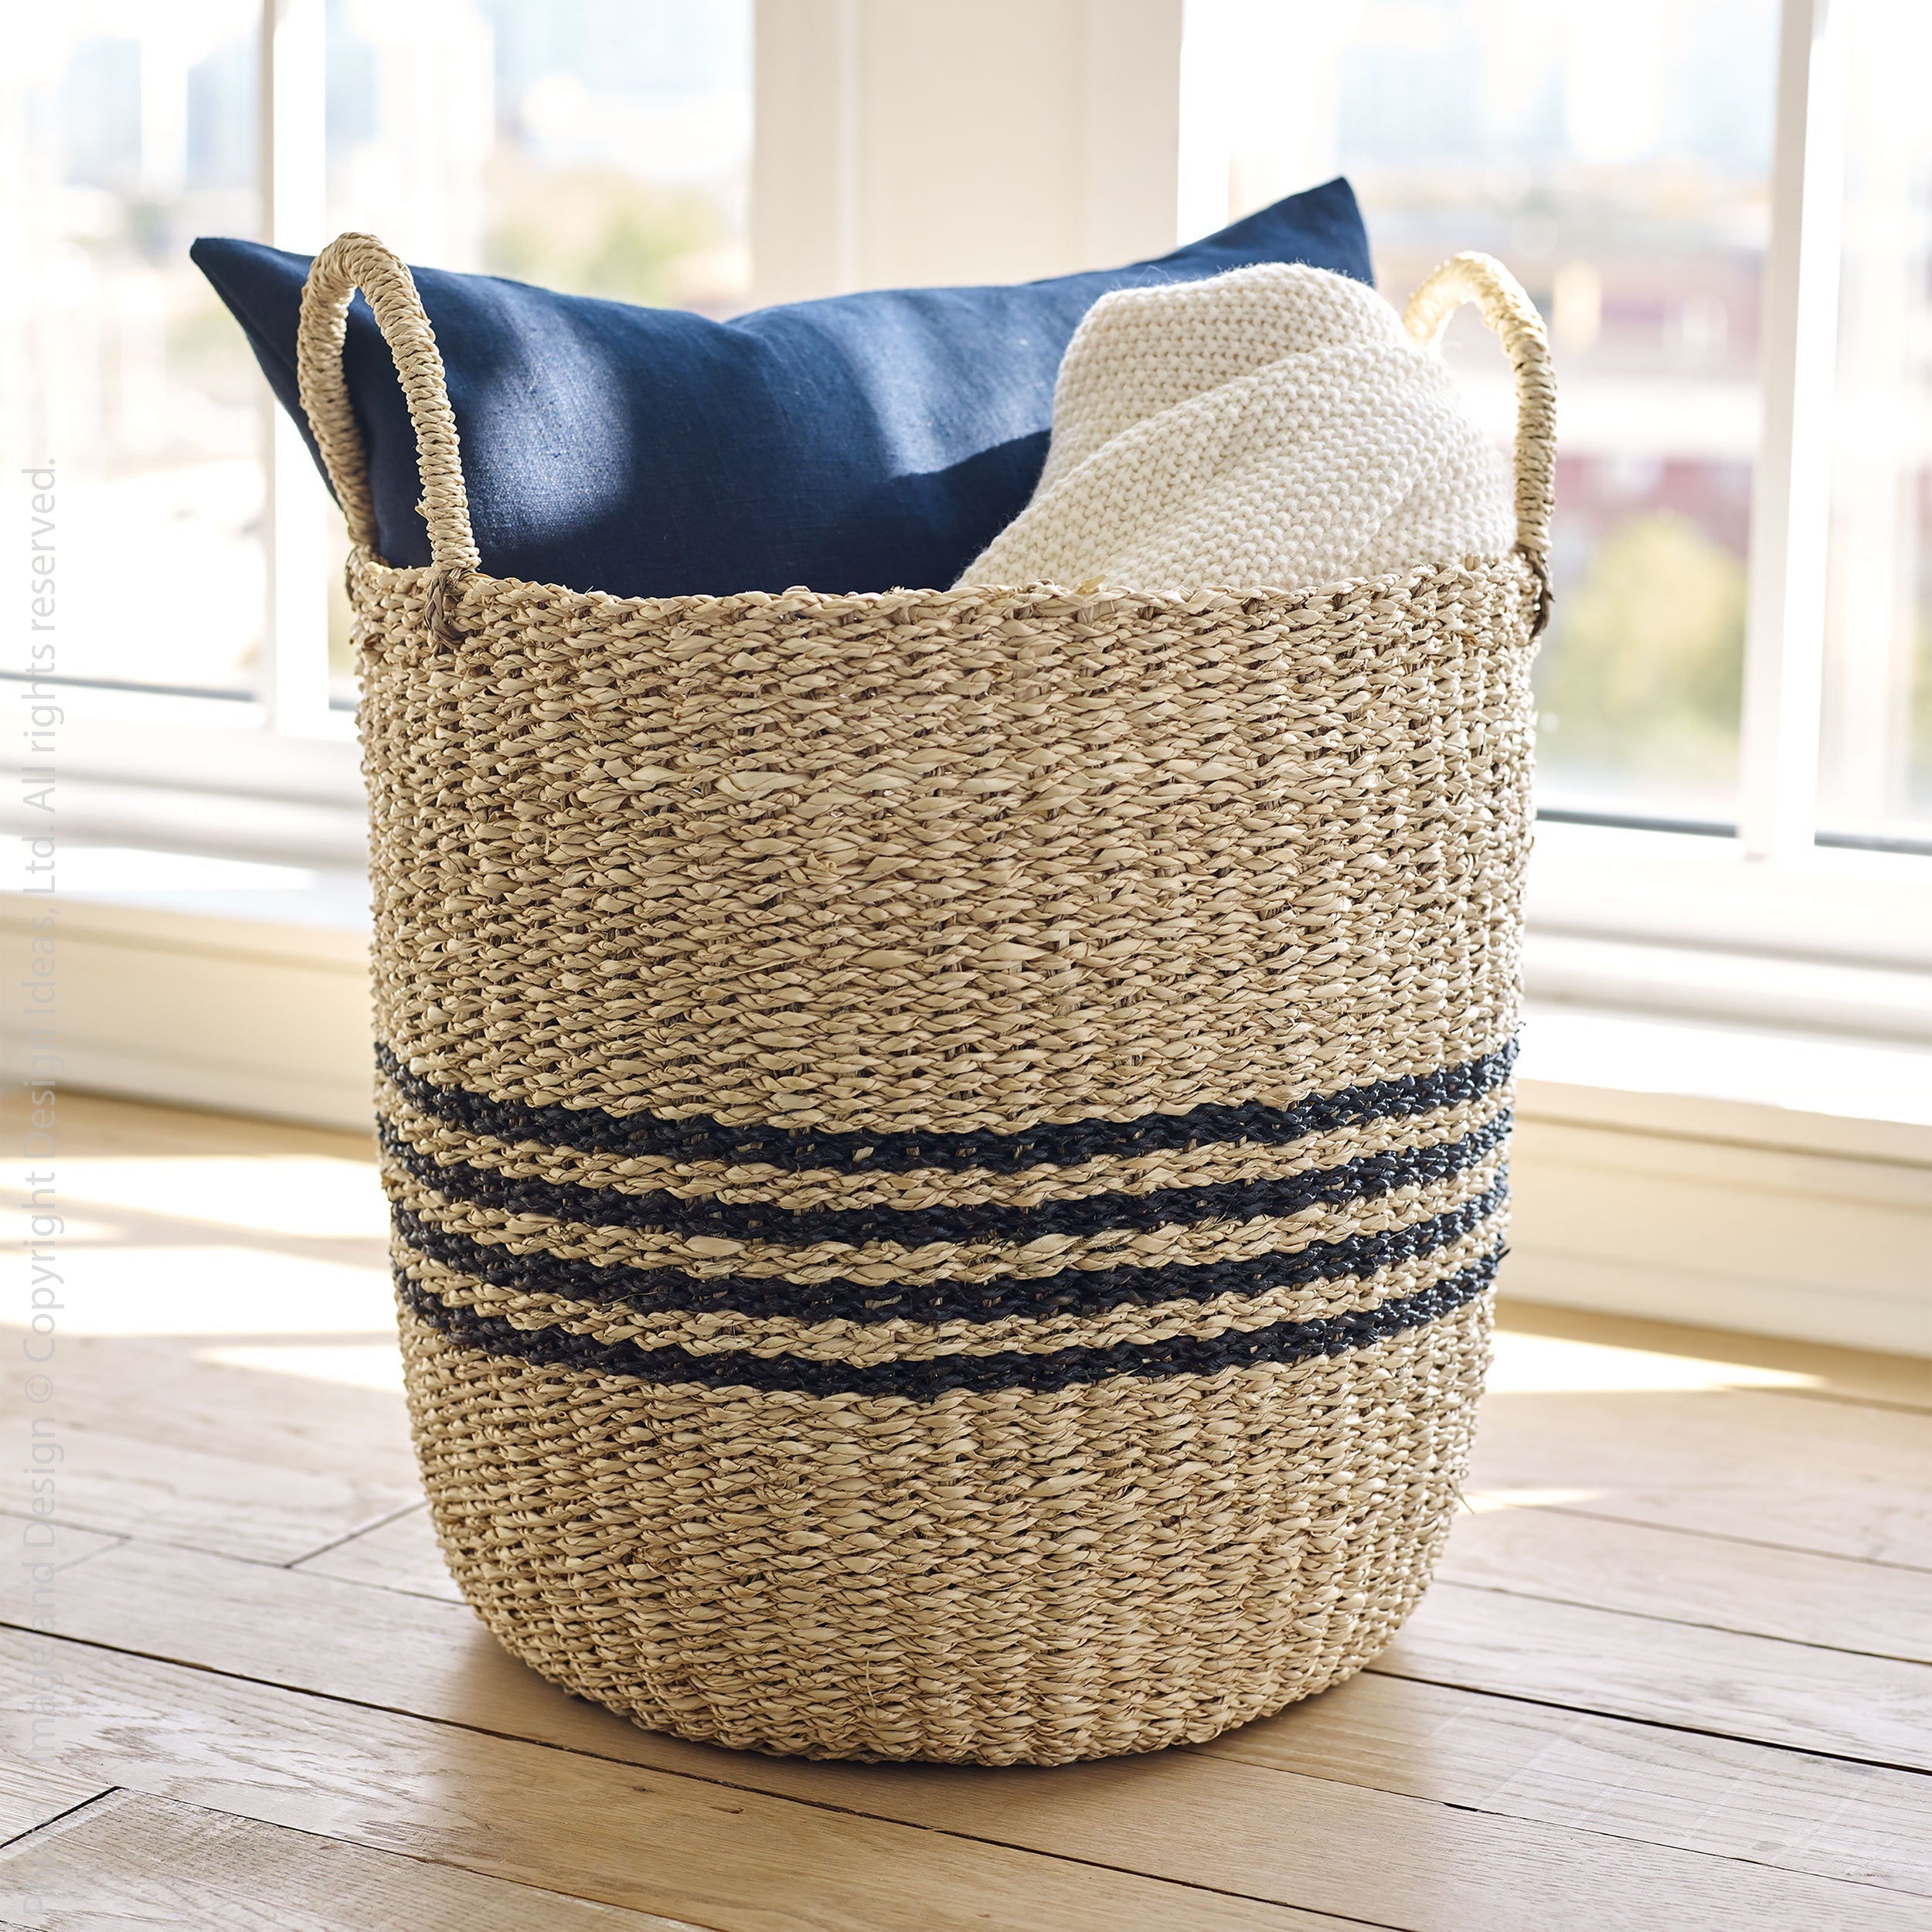 Scarborough™ baskets (set of 3) - Natural | Image 2 | Premium Basket from the Scarborough collection | made with Seagrass for long lasting use | texxture